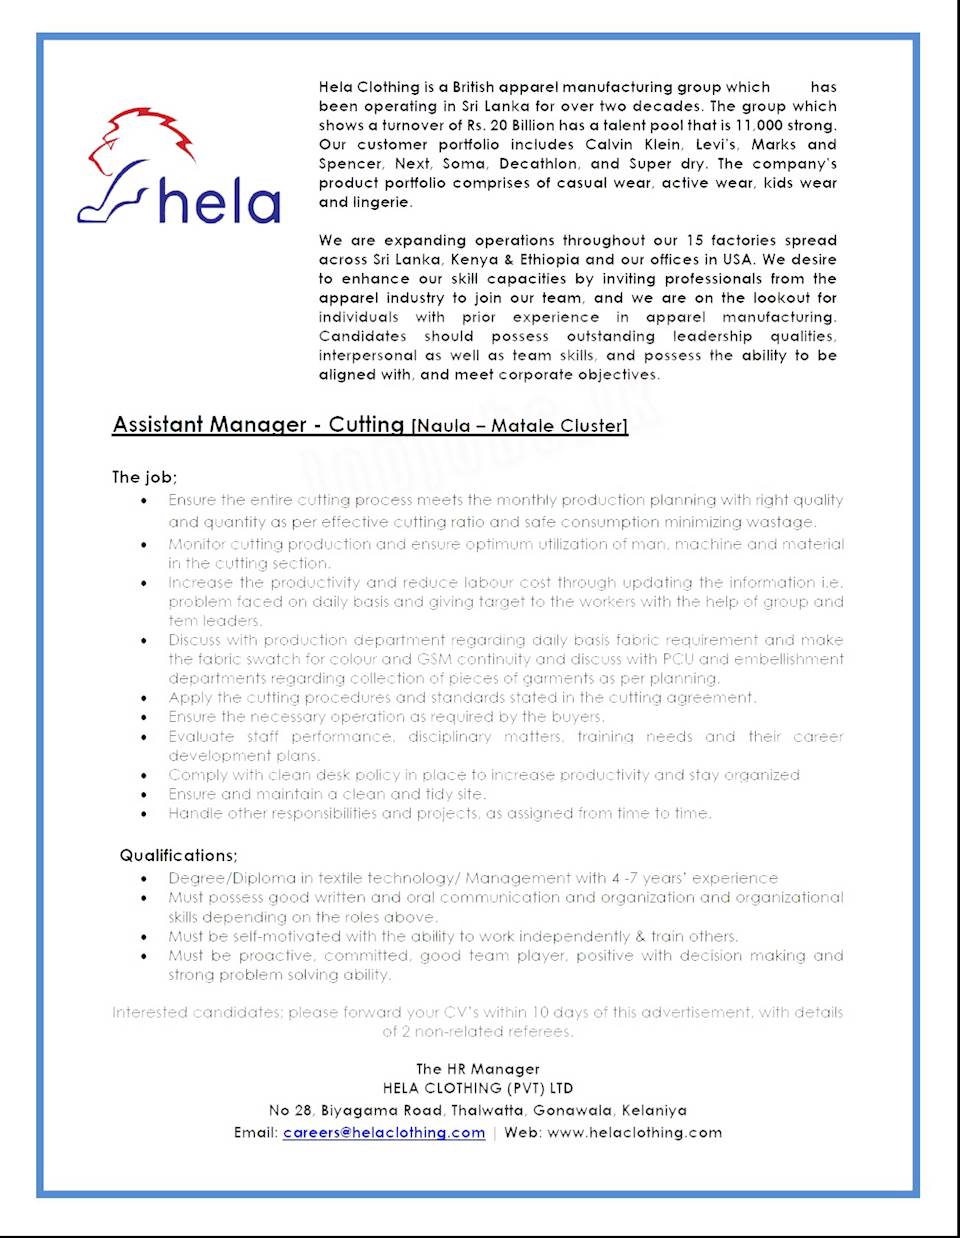 Assistant Manager - Cutting (Naula - Matale Cluster)